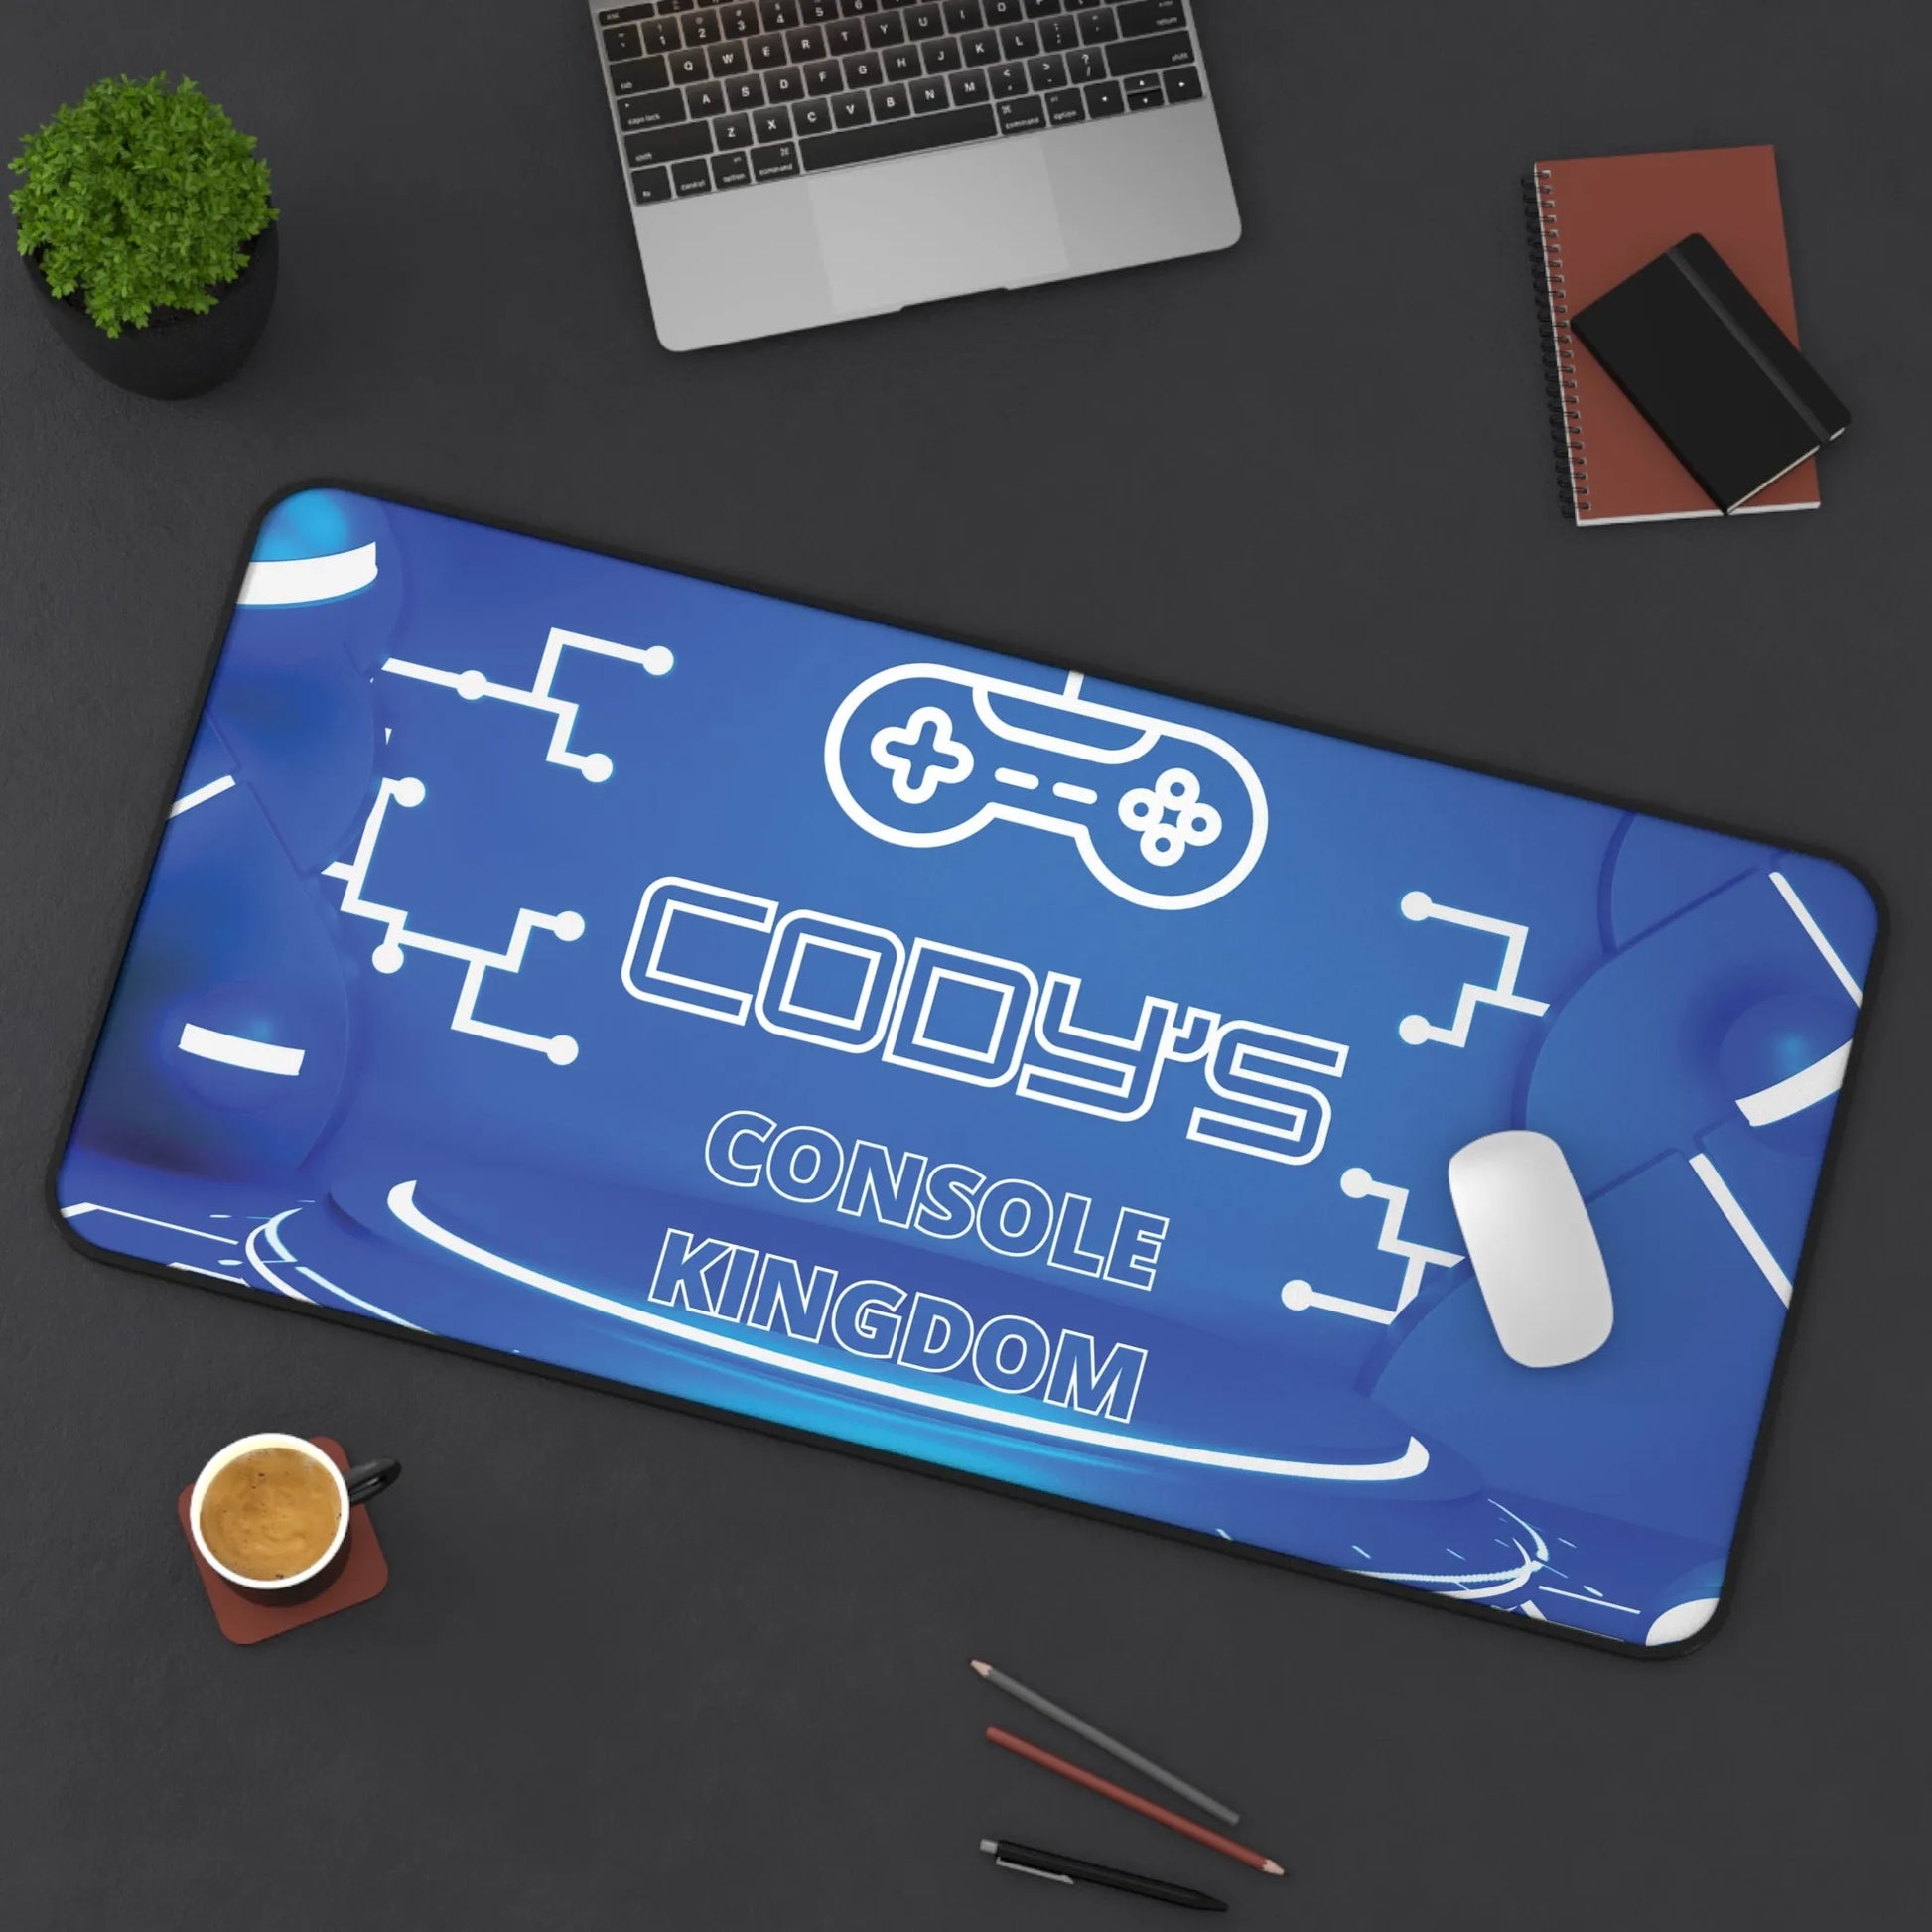 Personalized Console Kingdom Gaming Mat - Personalized Console Kingdom Desk Mat Large